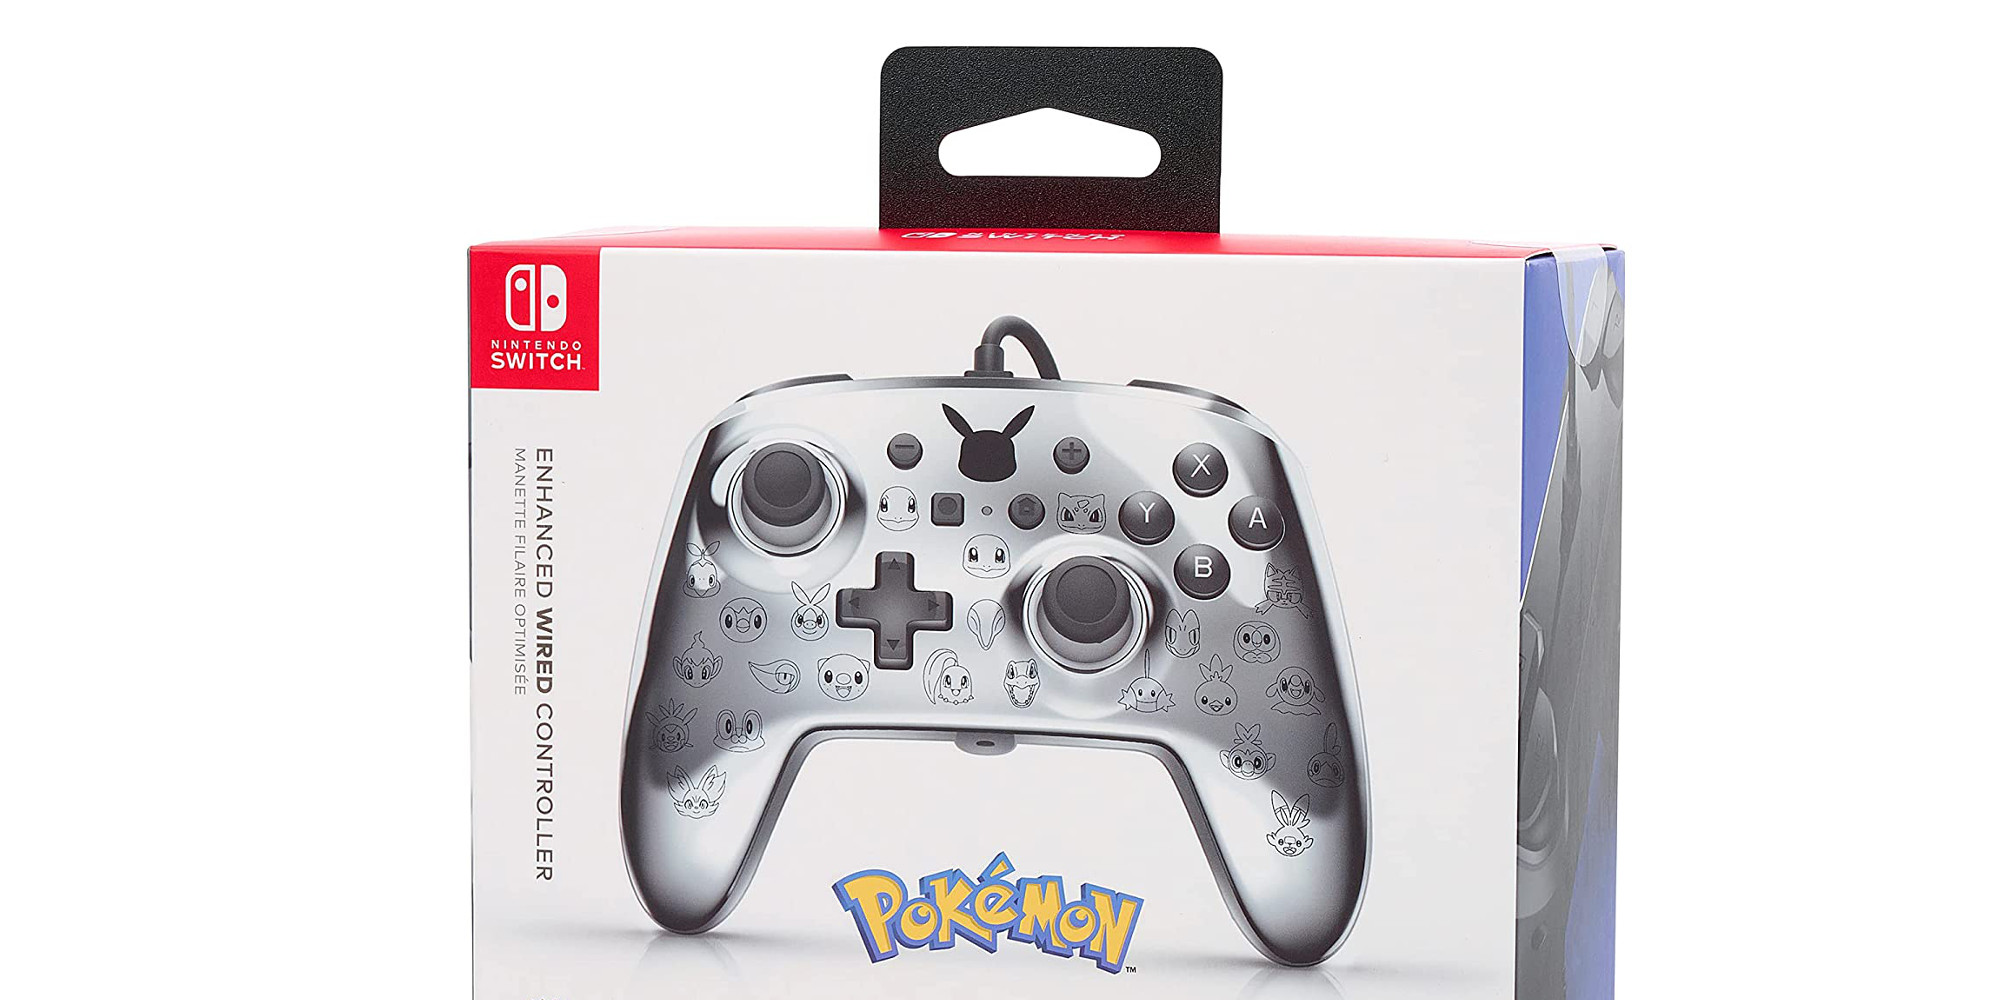 PowerA's Silver Pikachu Nintendo Switch Controller hits all-time 